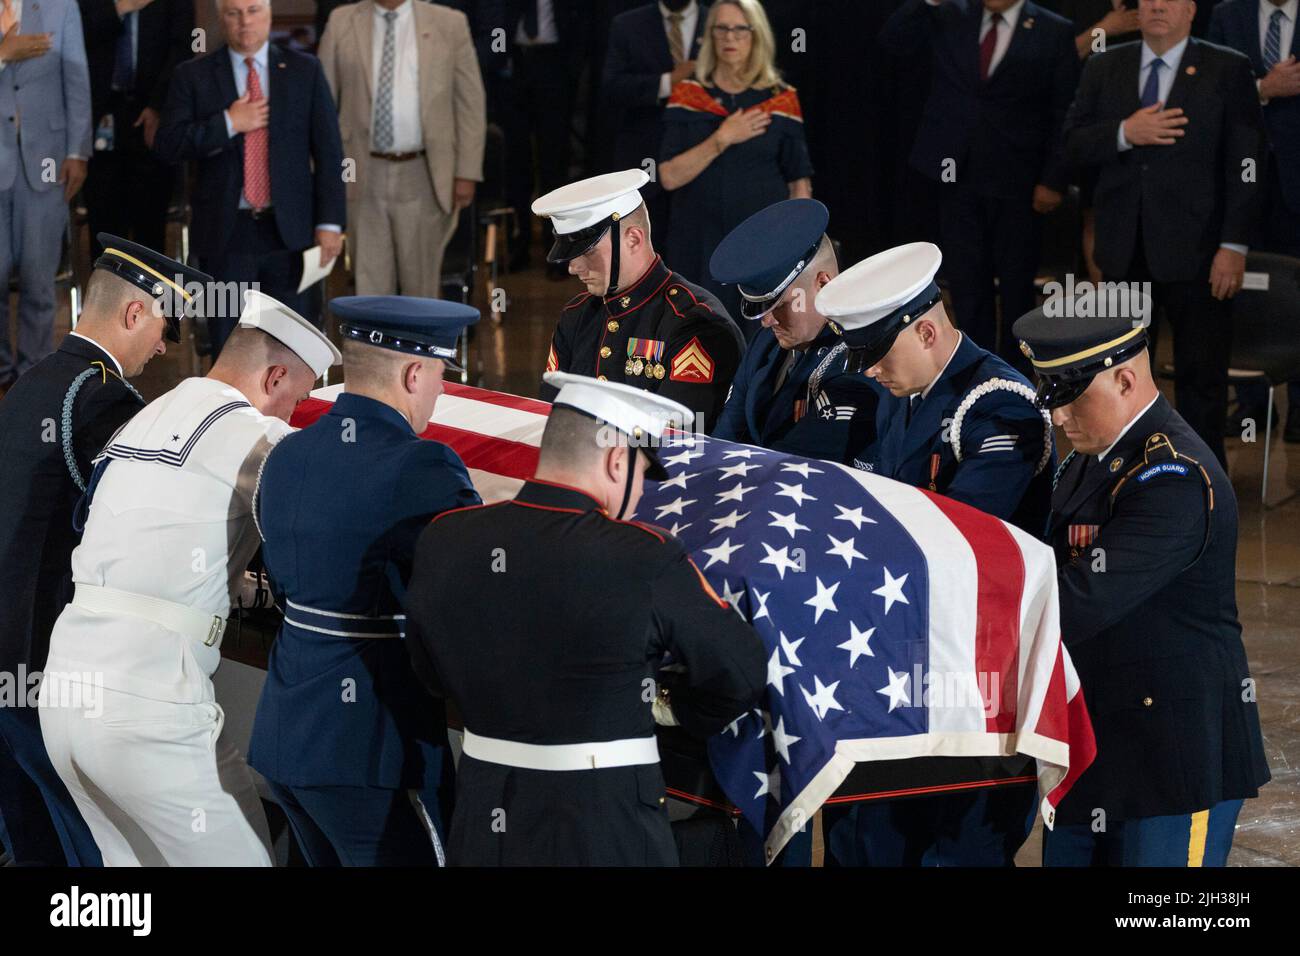 Washington DC, USA. 14th July, 2022. The casket of Marine Chief Warrant Officer 4 Hershel Woodrow âWoodyâ Williams, the last surviving World War II Medal of Honor recipient, is carried into the Rotunda of the US Capitol, in Washington DC, USA, 14 July 2022. The Marine Corps veteran, who died June 29th, was awarded the nationâs highest award for his actions on Iwo Jima. Credit: Eric Lee/Pool via CNP/dpa/Alamy Live News Stock Photo